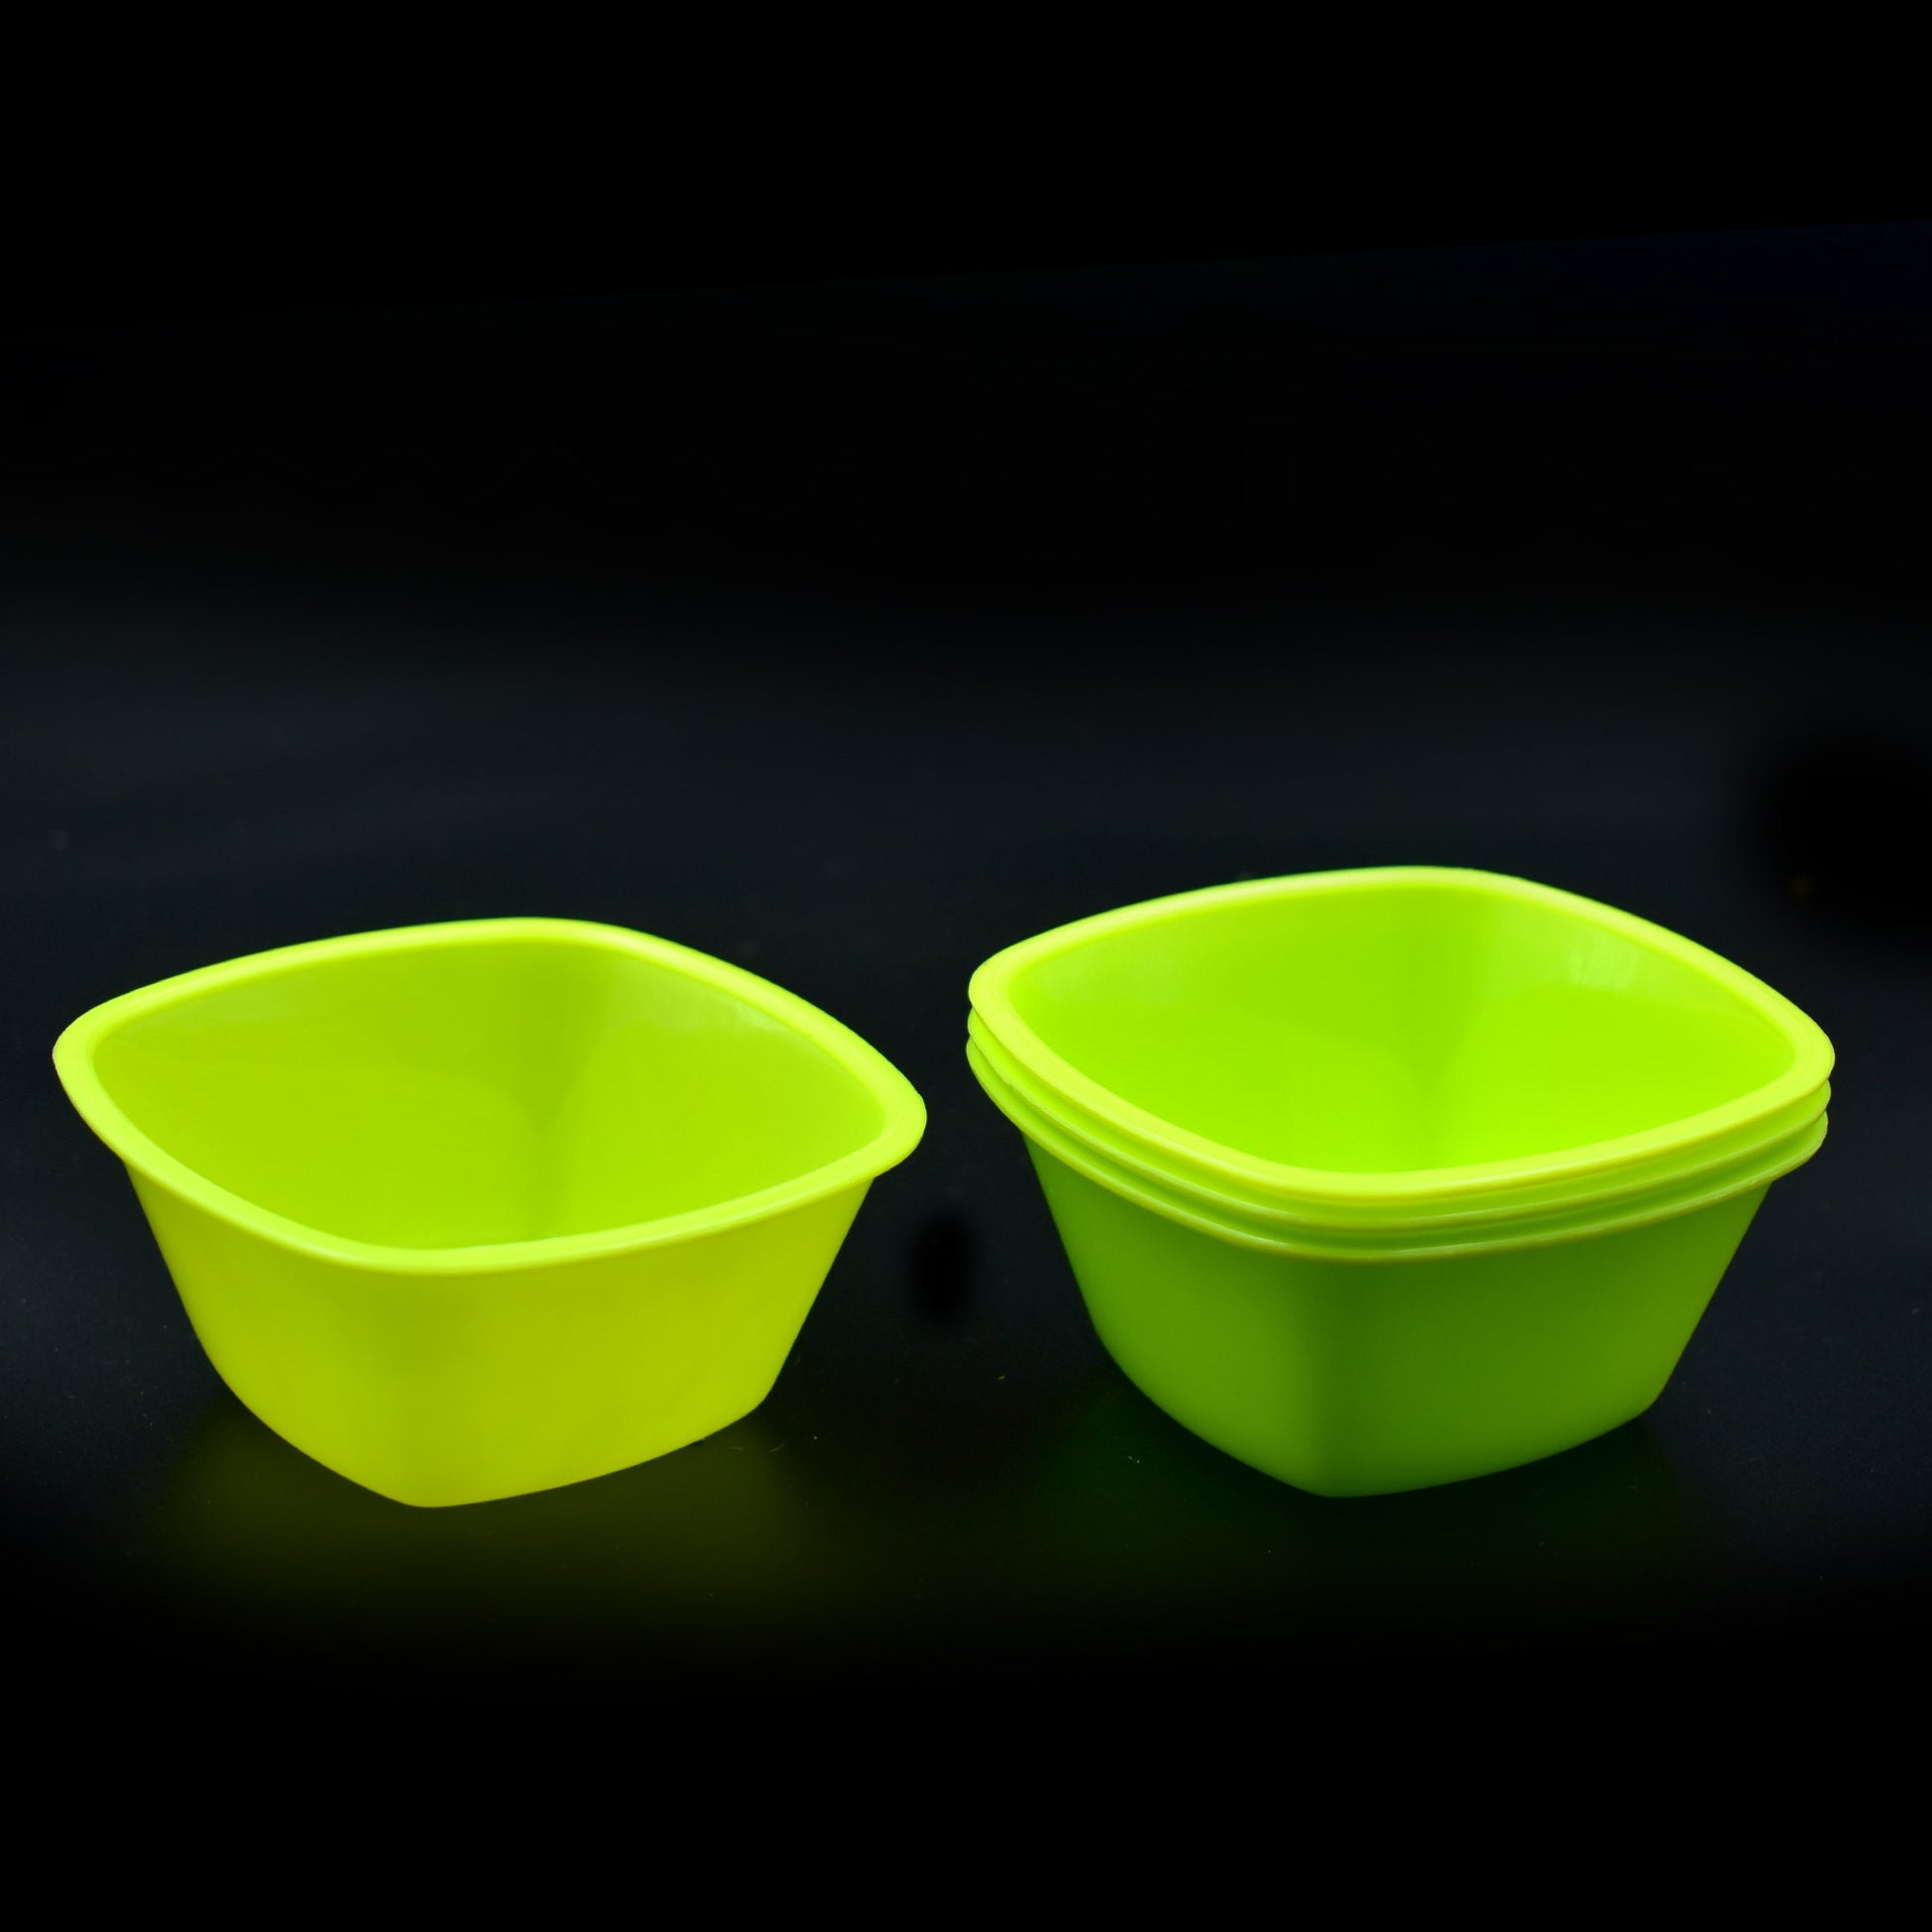 Square Plastic Bowl For Serving Food (Pack of 4)